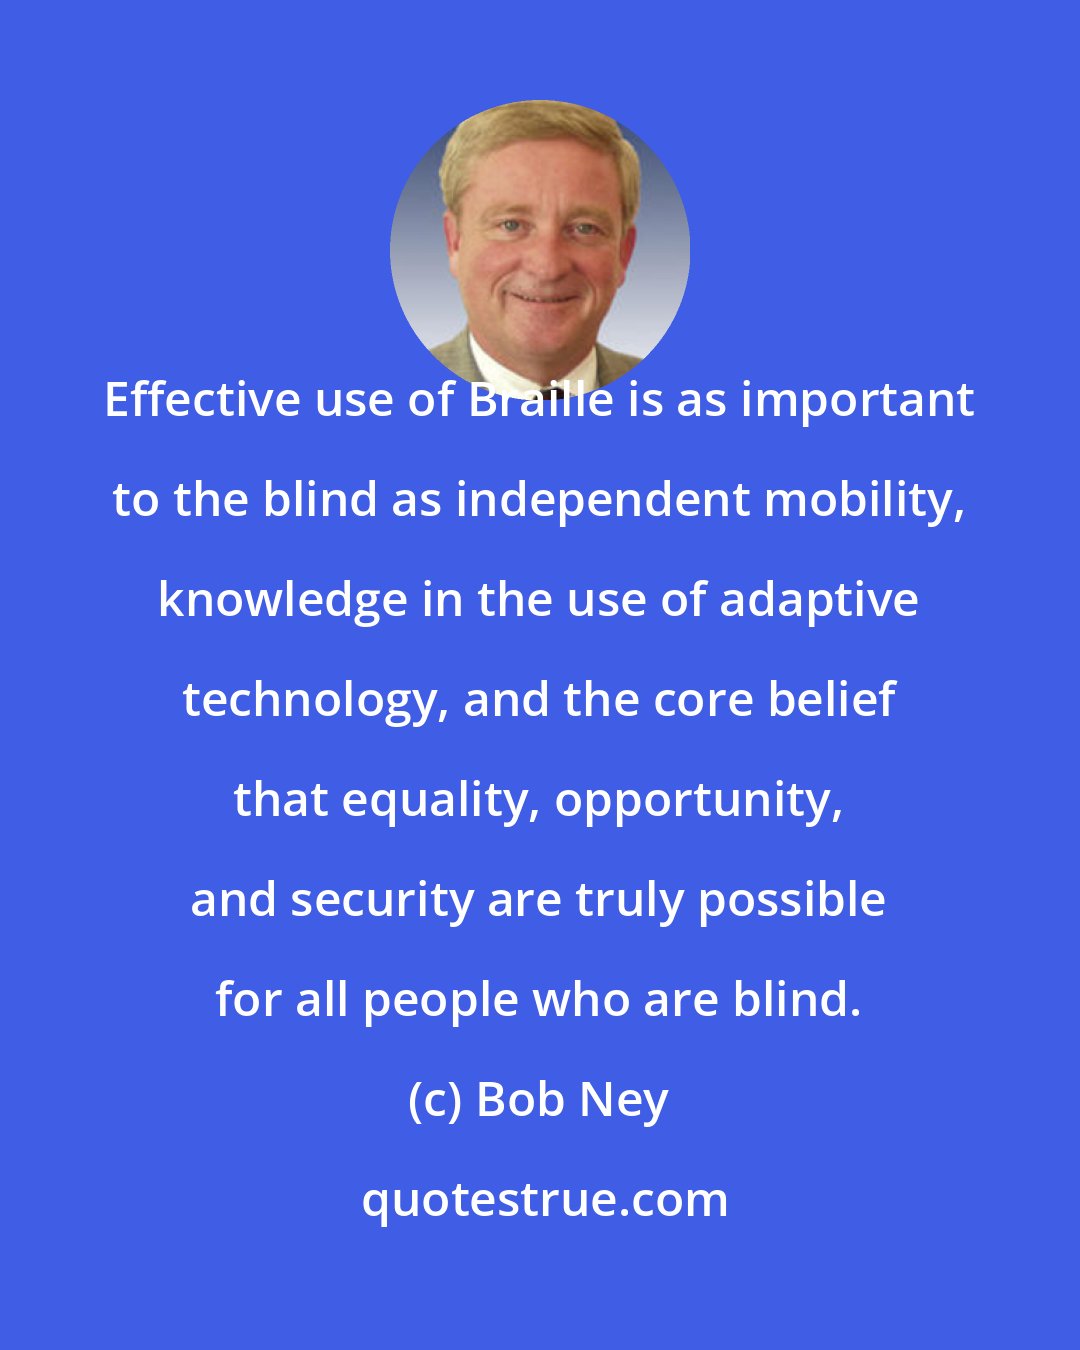 Bob Ney: Effective use of Braille is as important to the blind as independent mobility, knowledge in the use of adaptive technology, and the core belief that equality, opportunity, and security are truly possible for all people who are blind.